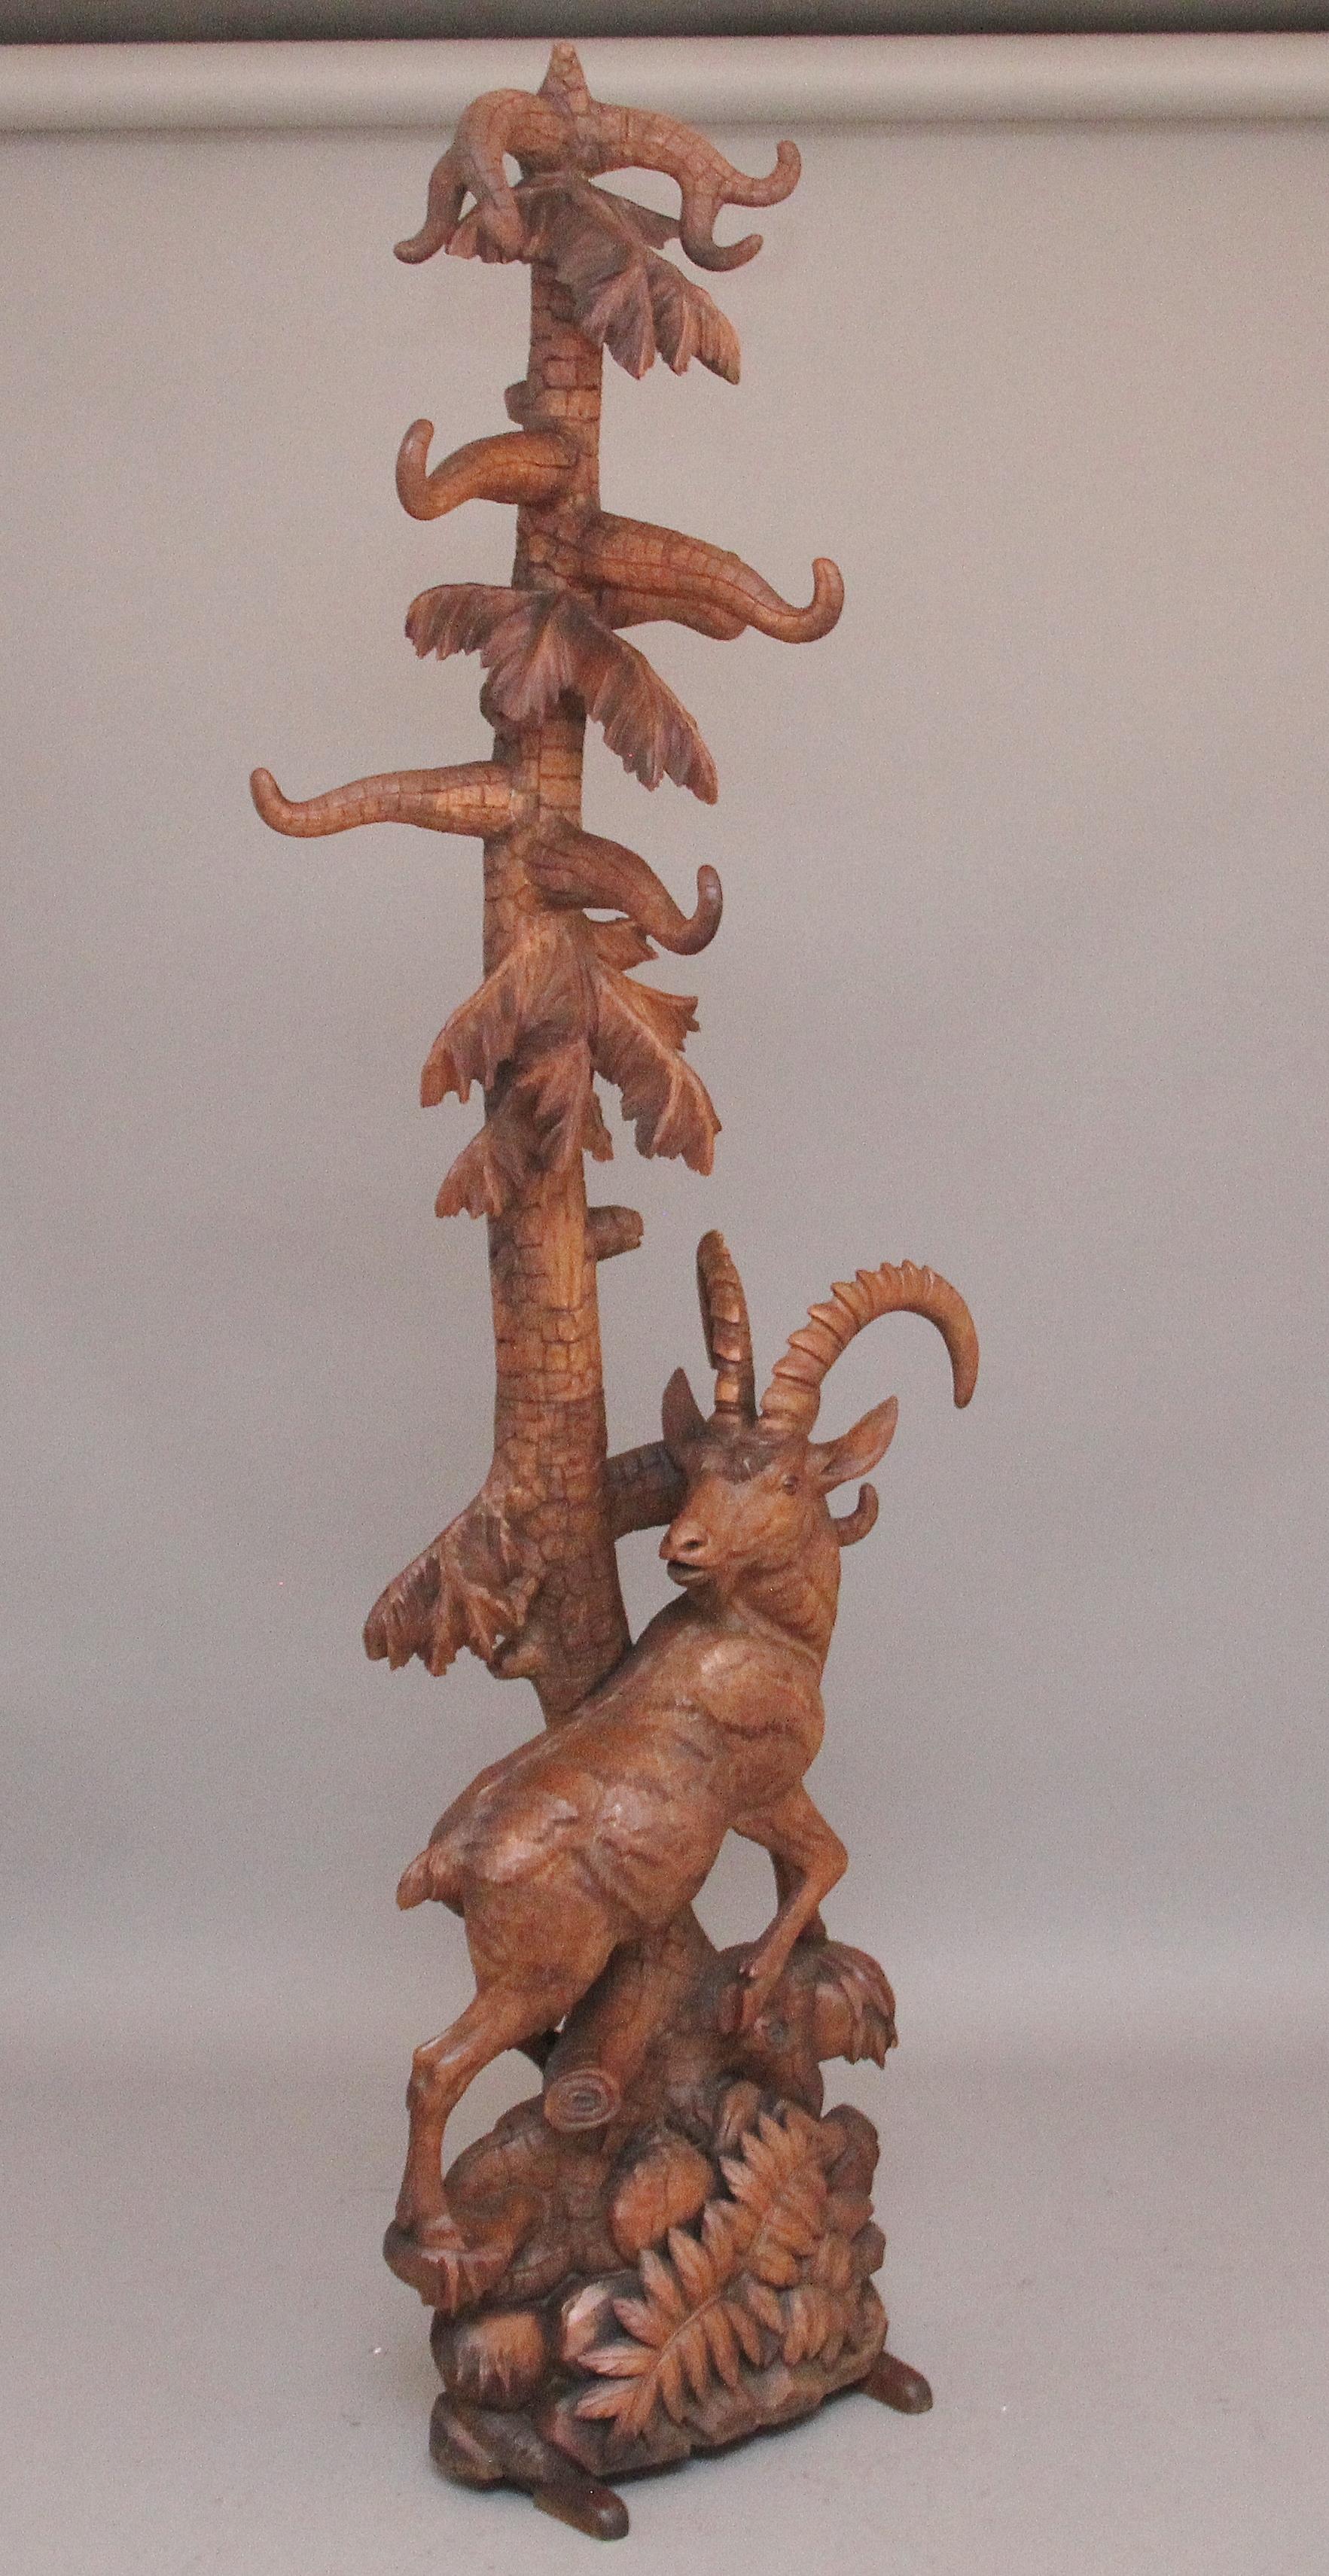 Superb quality Large 19th century black forest hall stand of an ibex amongst a tree and foliage, the tree having various branches and leaves, made of walnut the the construction is very sturdy and the branches are more than strong enough to